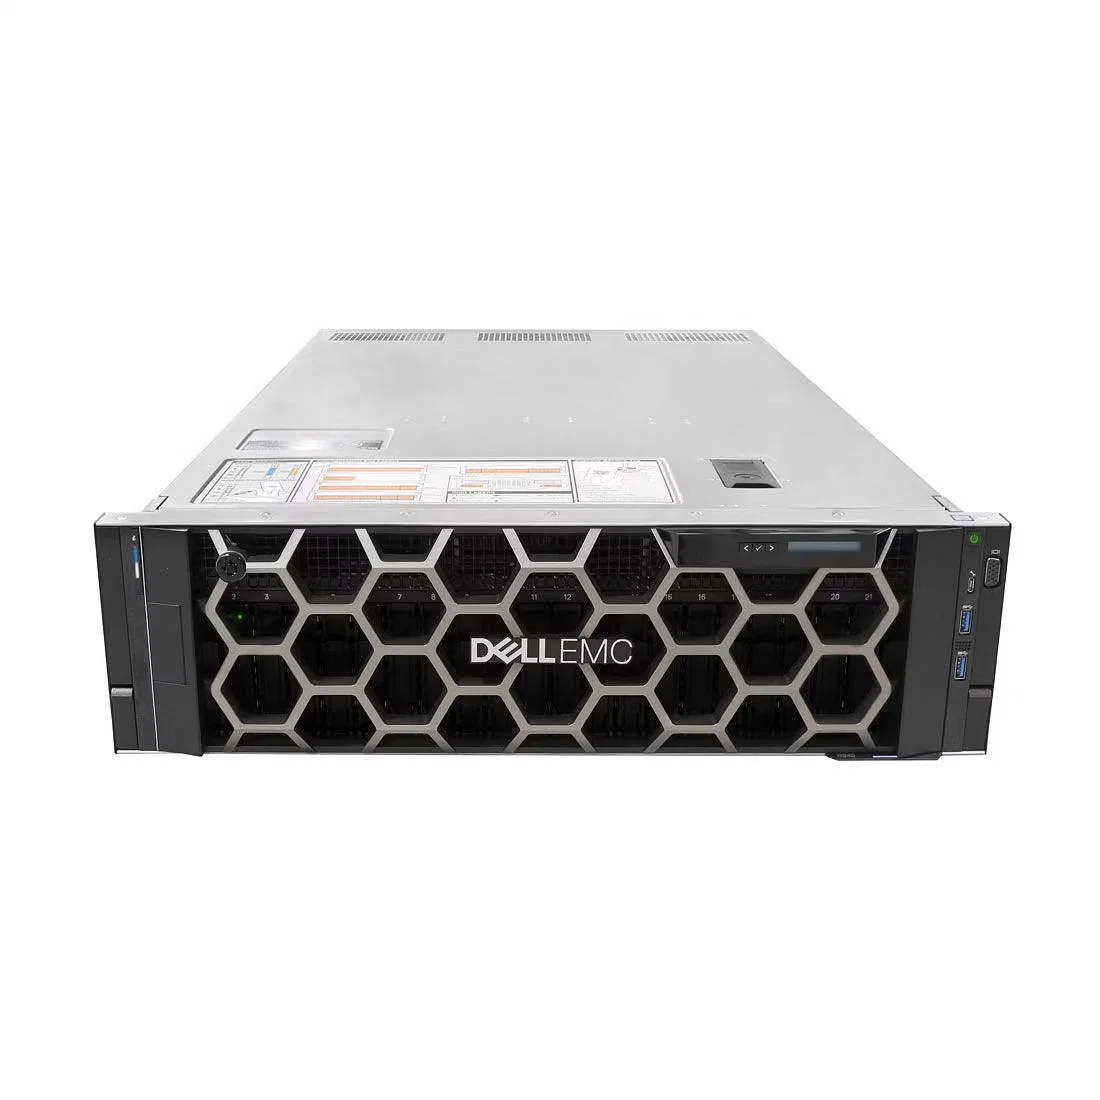 Low Cost Funcam Windows 2022 Charge Server DELL Poweredge R940 Server